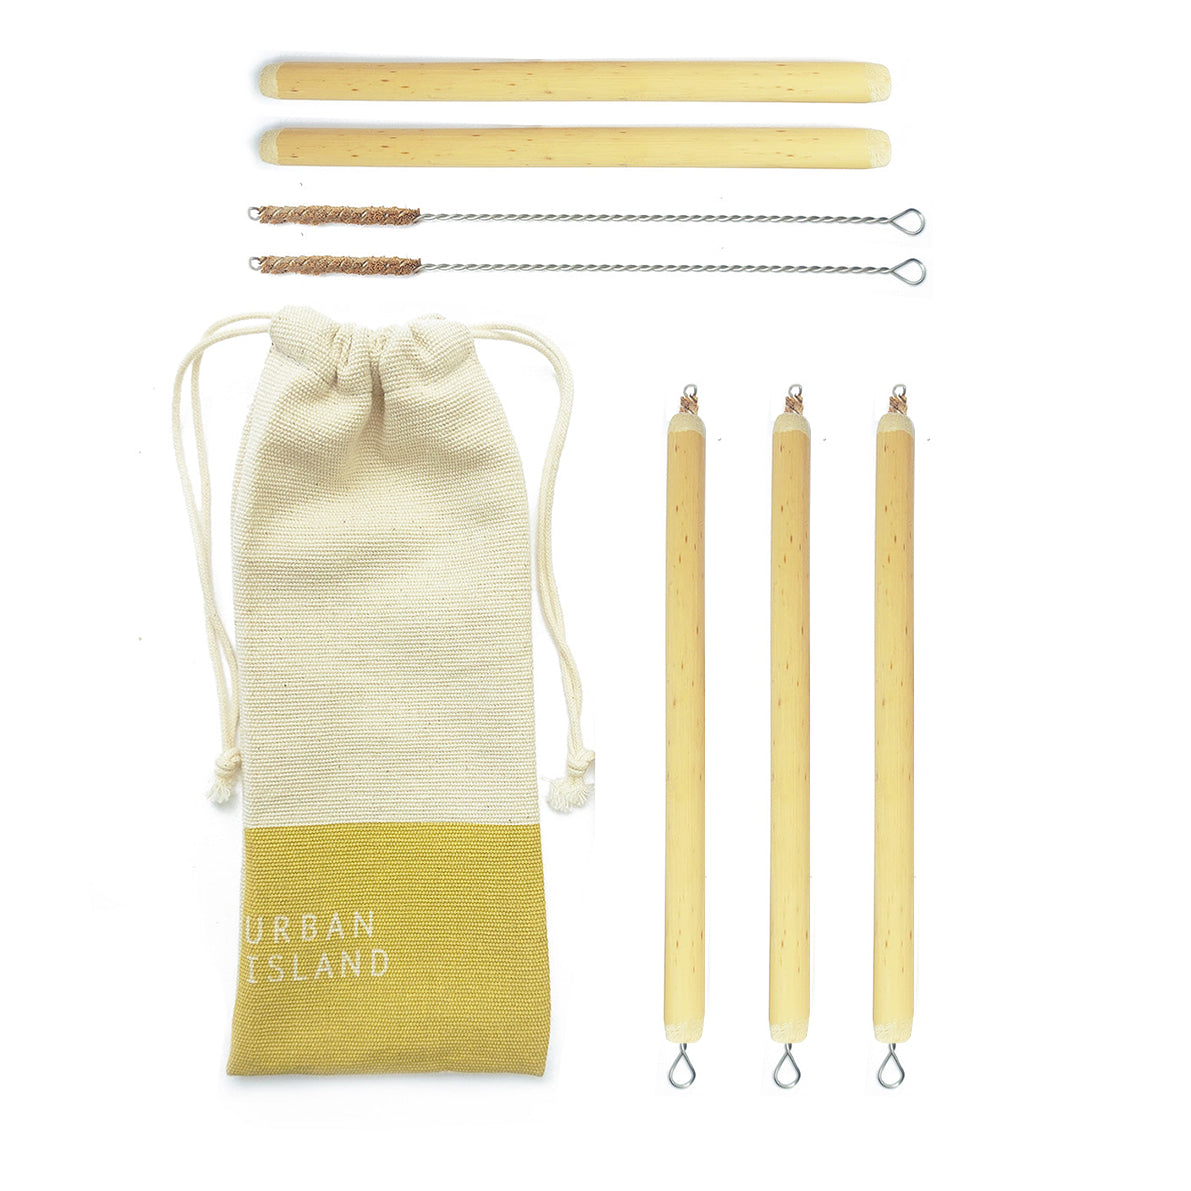 Bamboo Straws with Brushes - set of 5